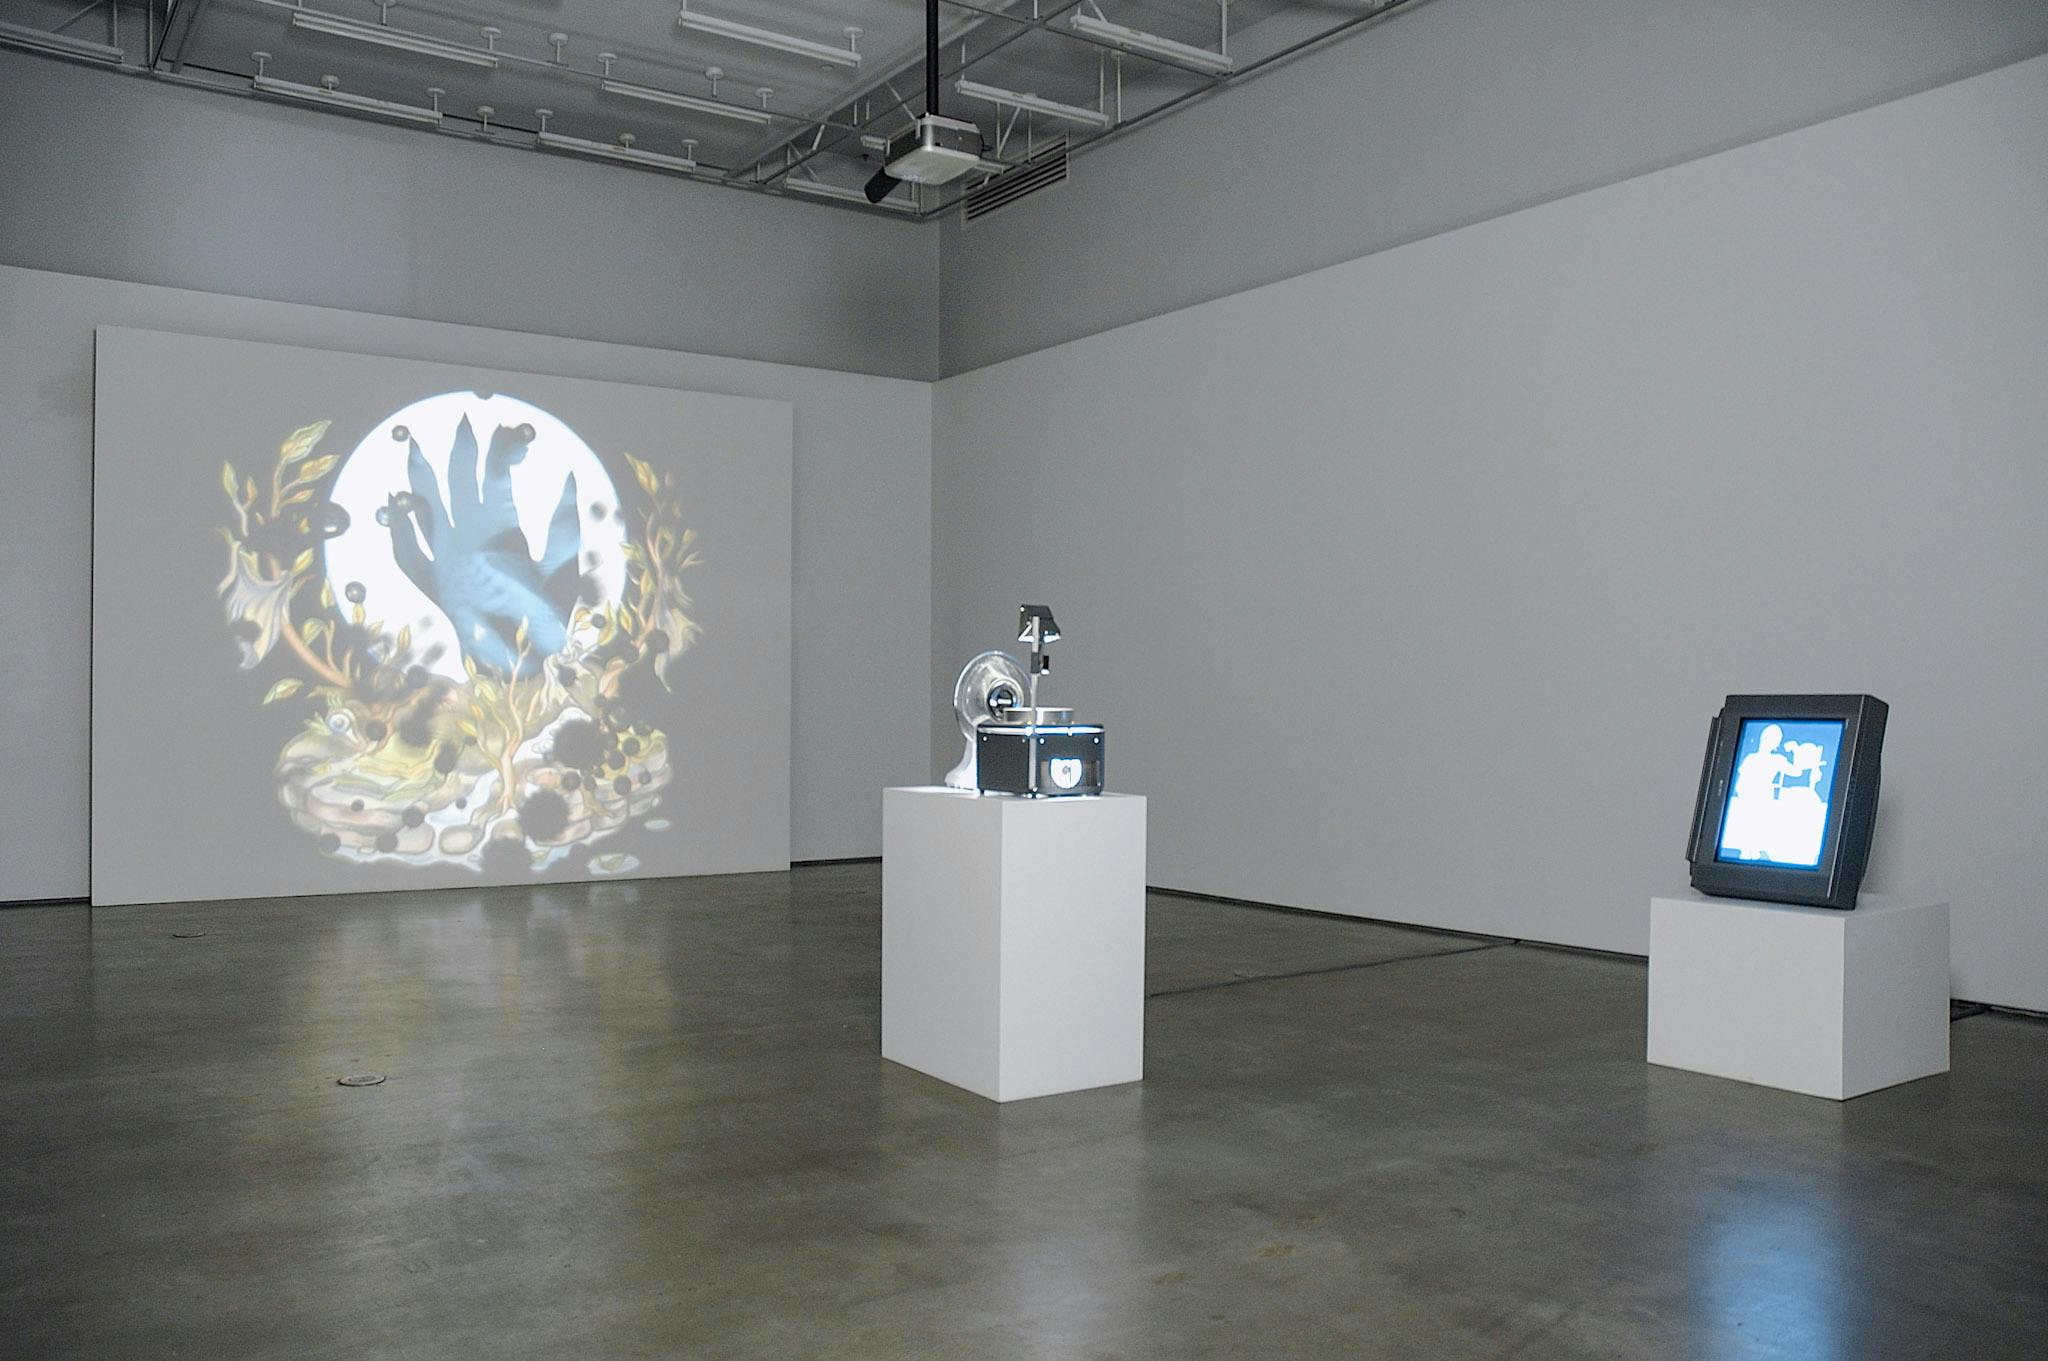 An installation image of artworks in a gallery. A projector placed in the middle of the room project an illustration of a blue hand on a far wall. On the right side of the projector, an illustration of a person is displayed on a TV screen.